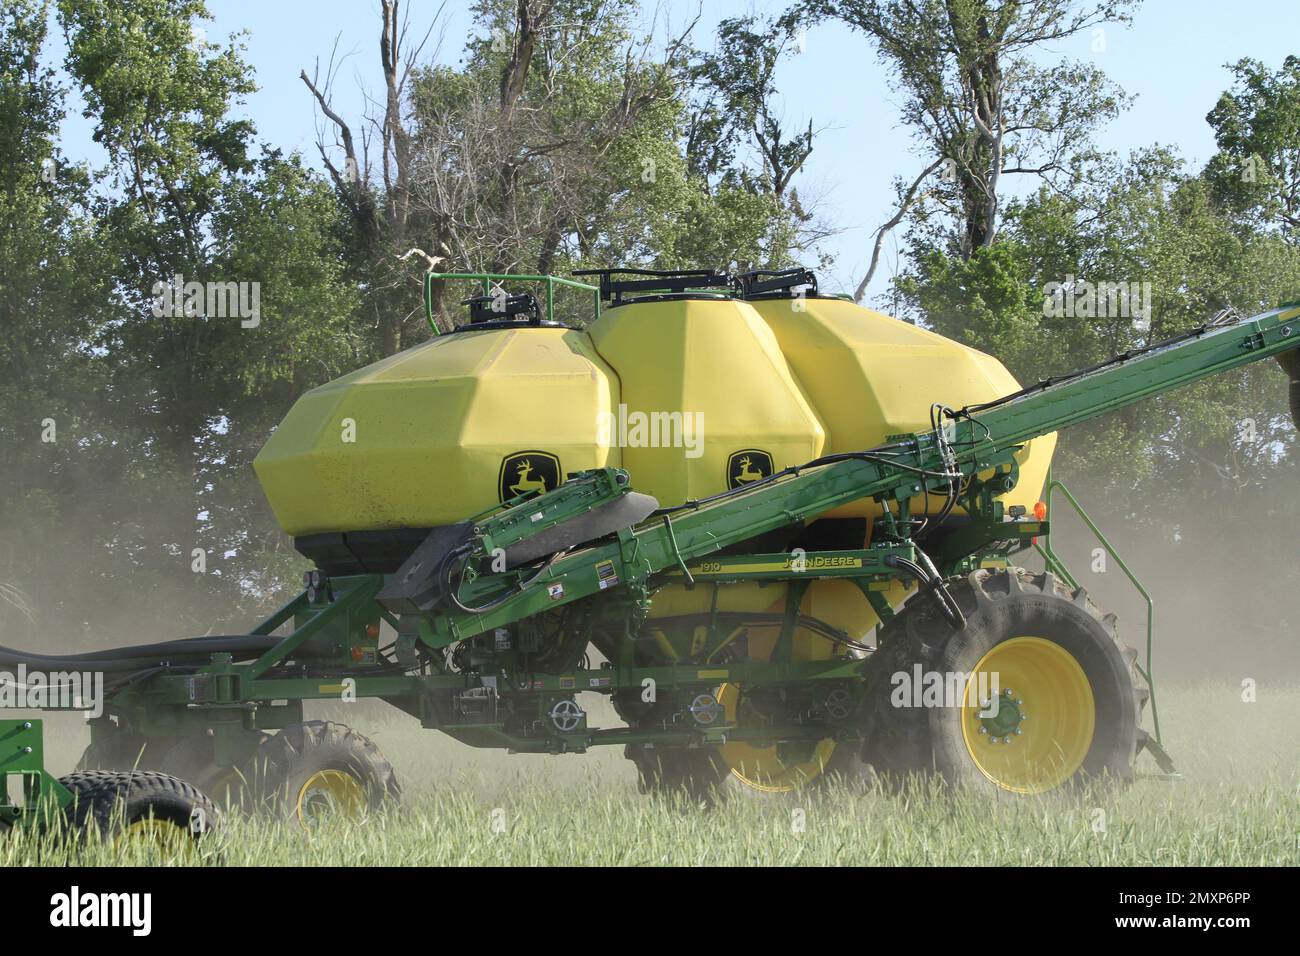 A John Deere Sprayer in a farm field with trees and sky Stock Photo